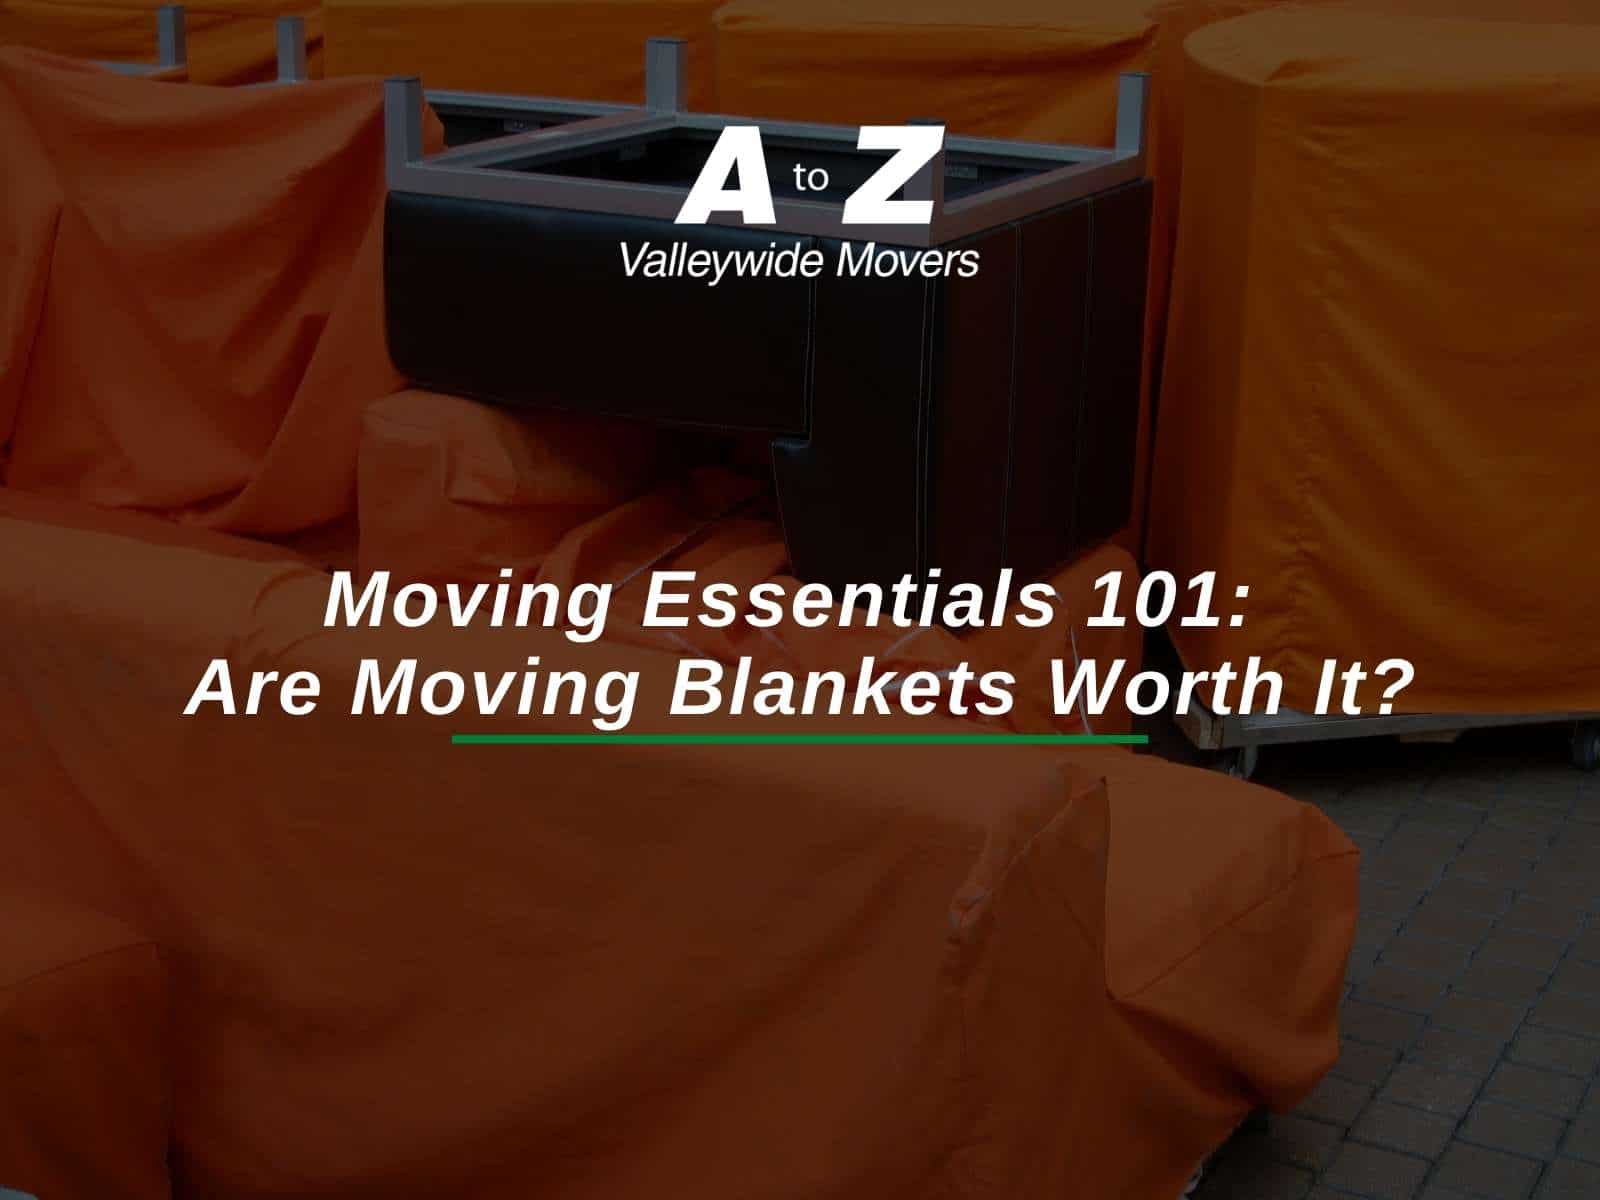 Moving blankets provided by a moving company in Arizona